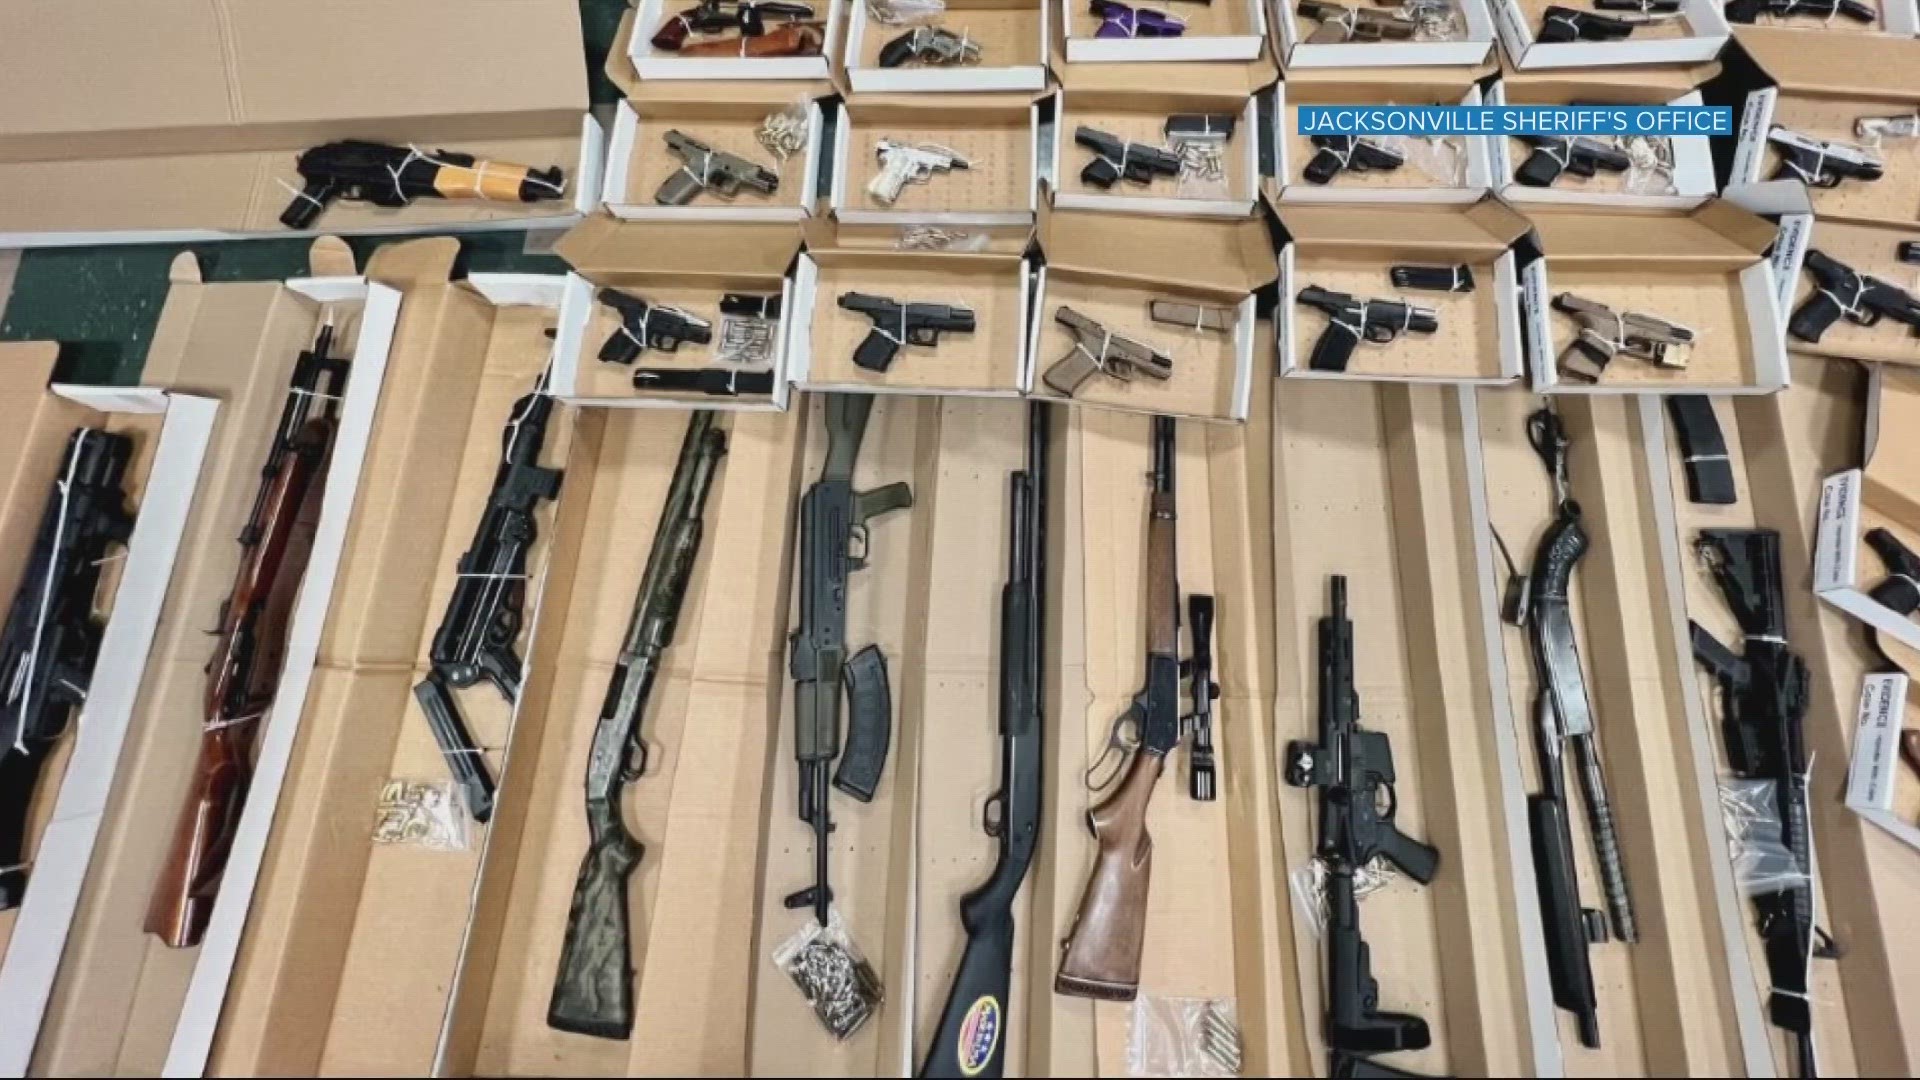 Three men are behind bars after an investigation into what police are calling an armory, drug manufacturing and distribution residence.